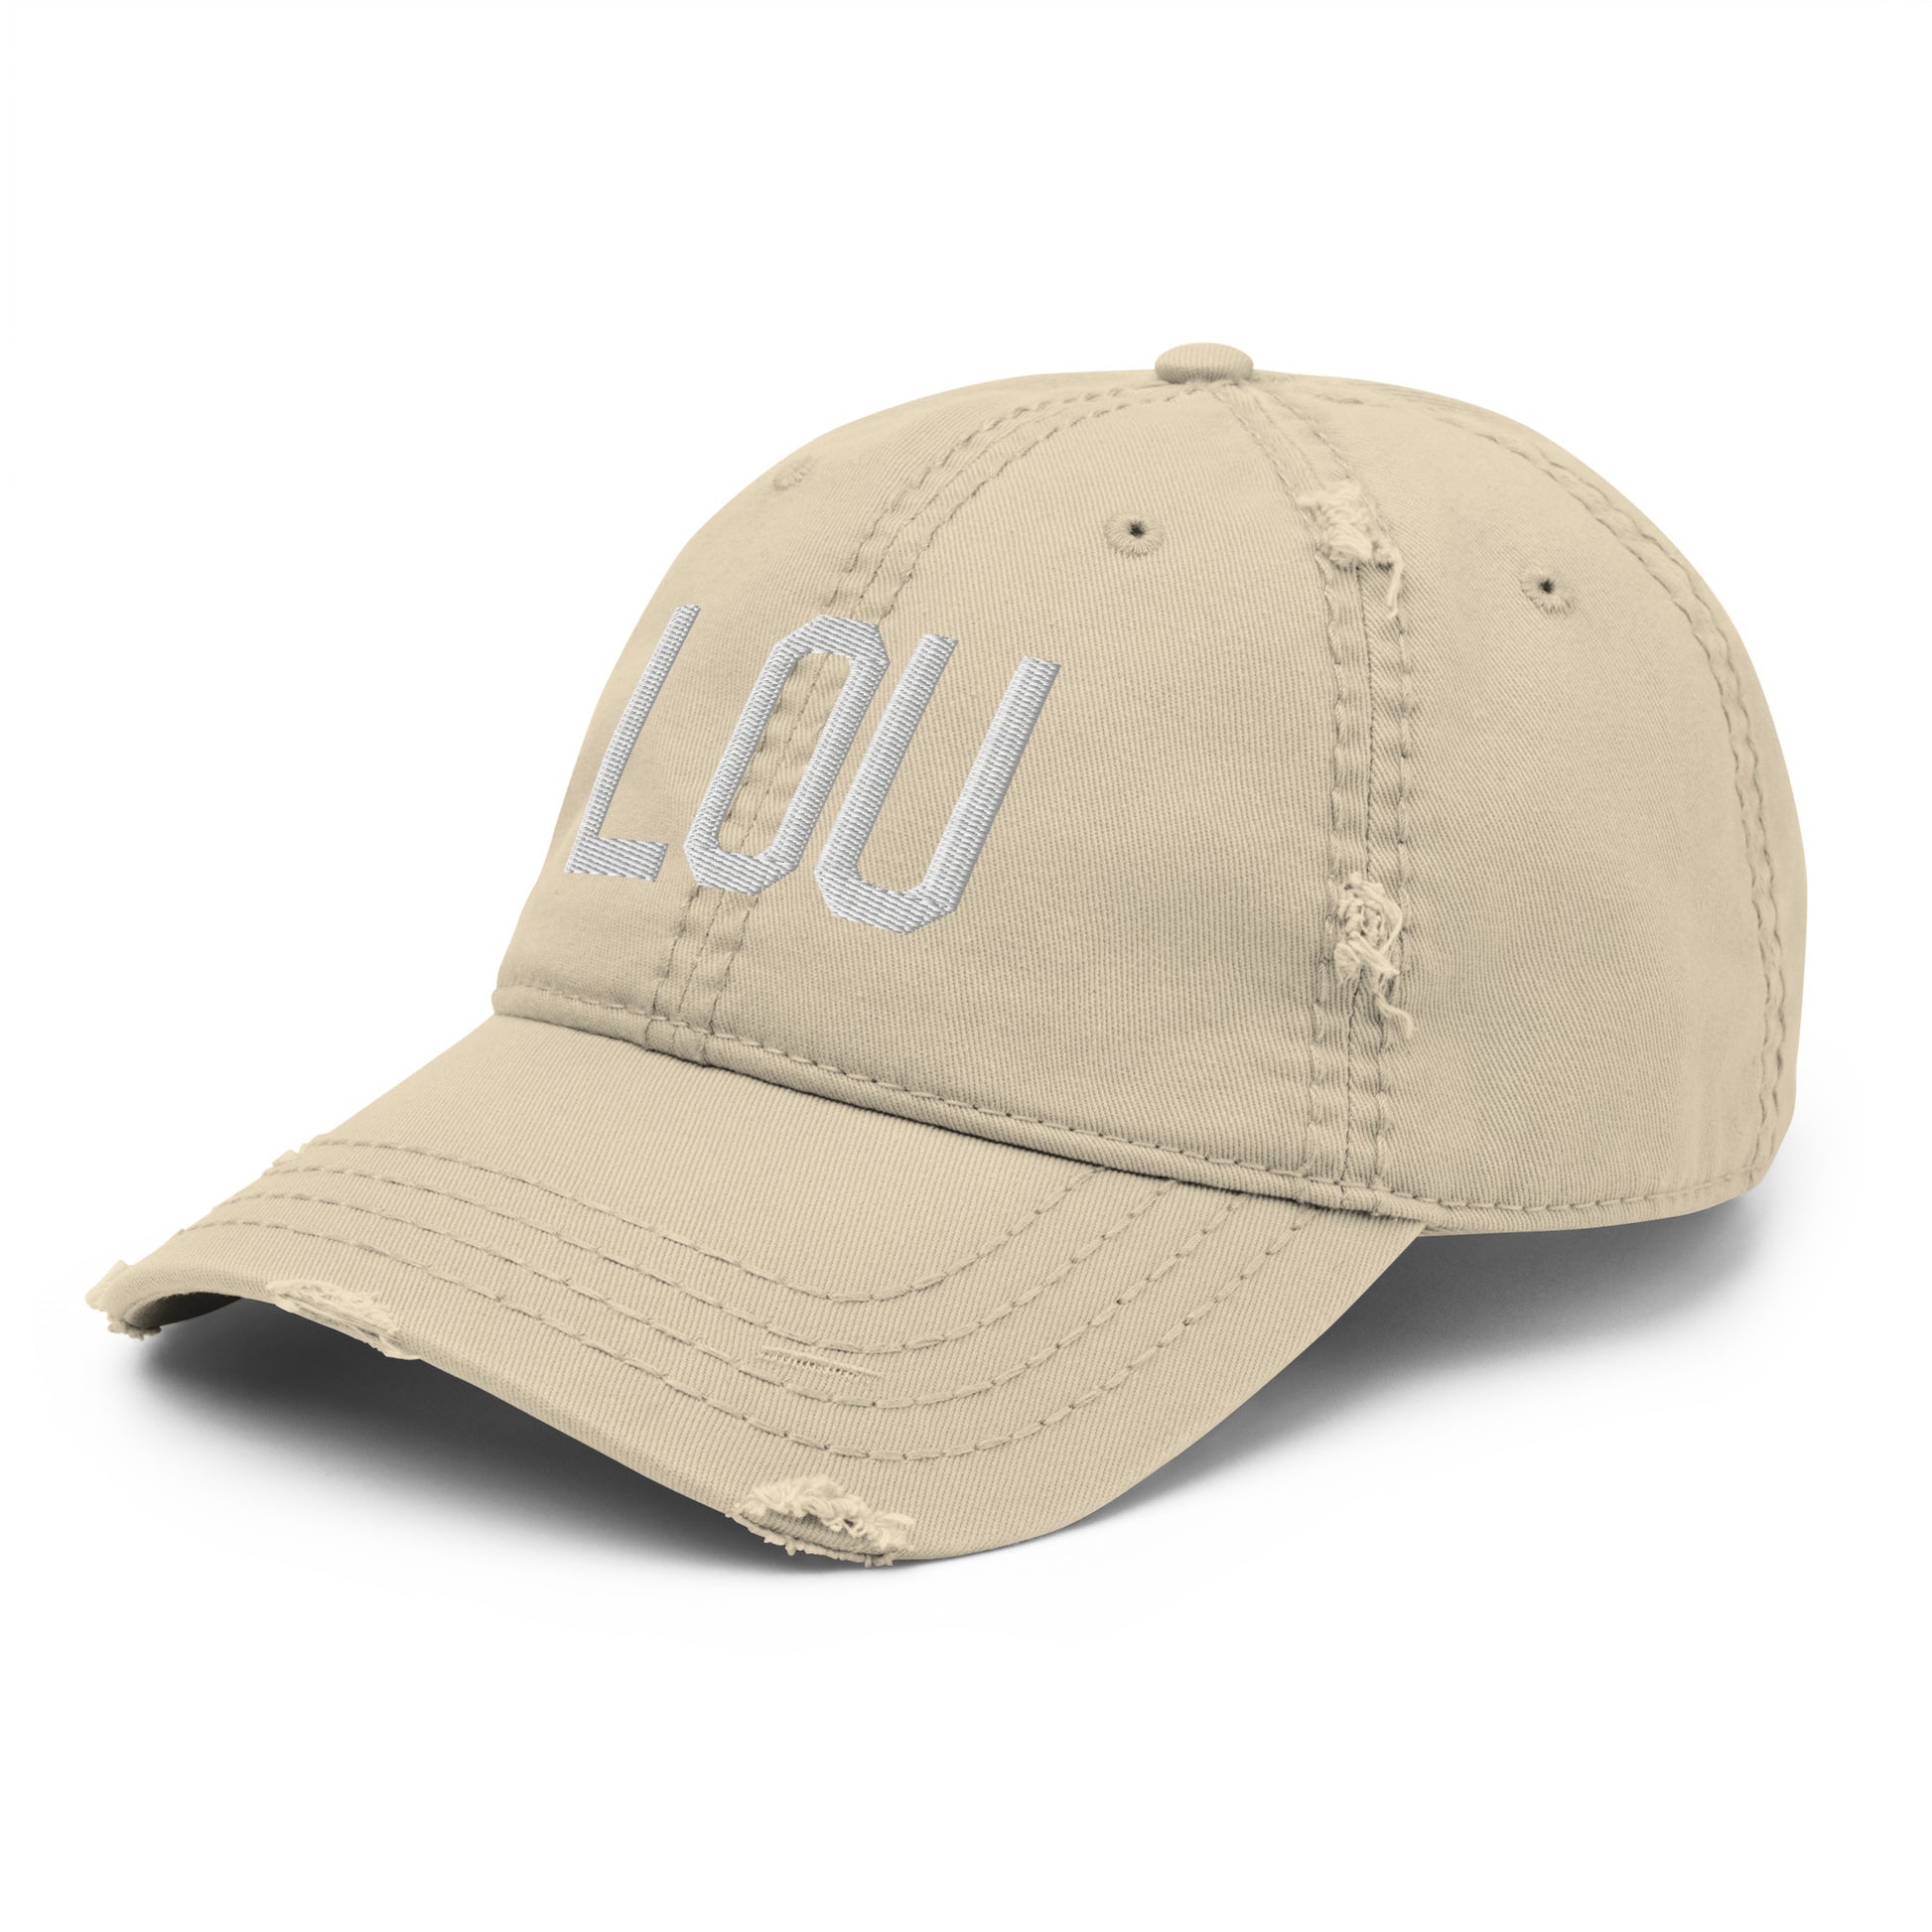 Airport Code Distressed Hat - White • LOU Louisville • YHM Designs - Image 19